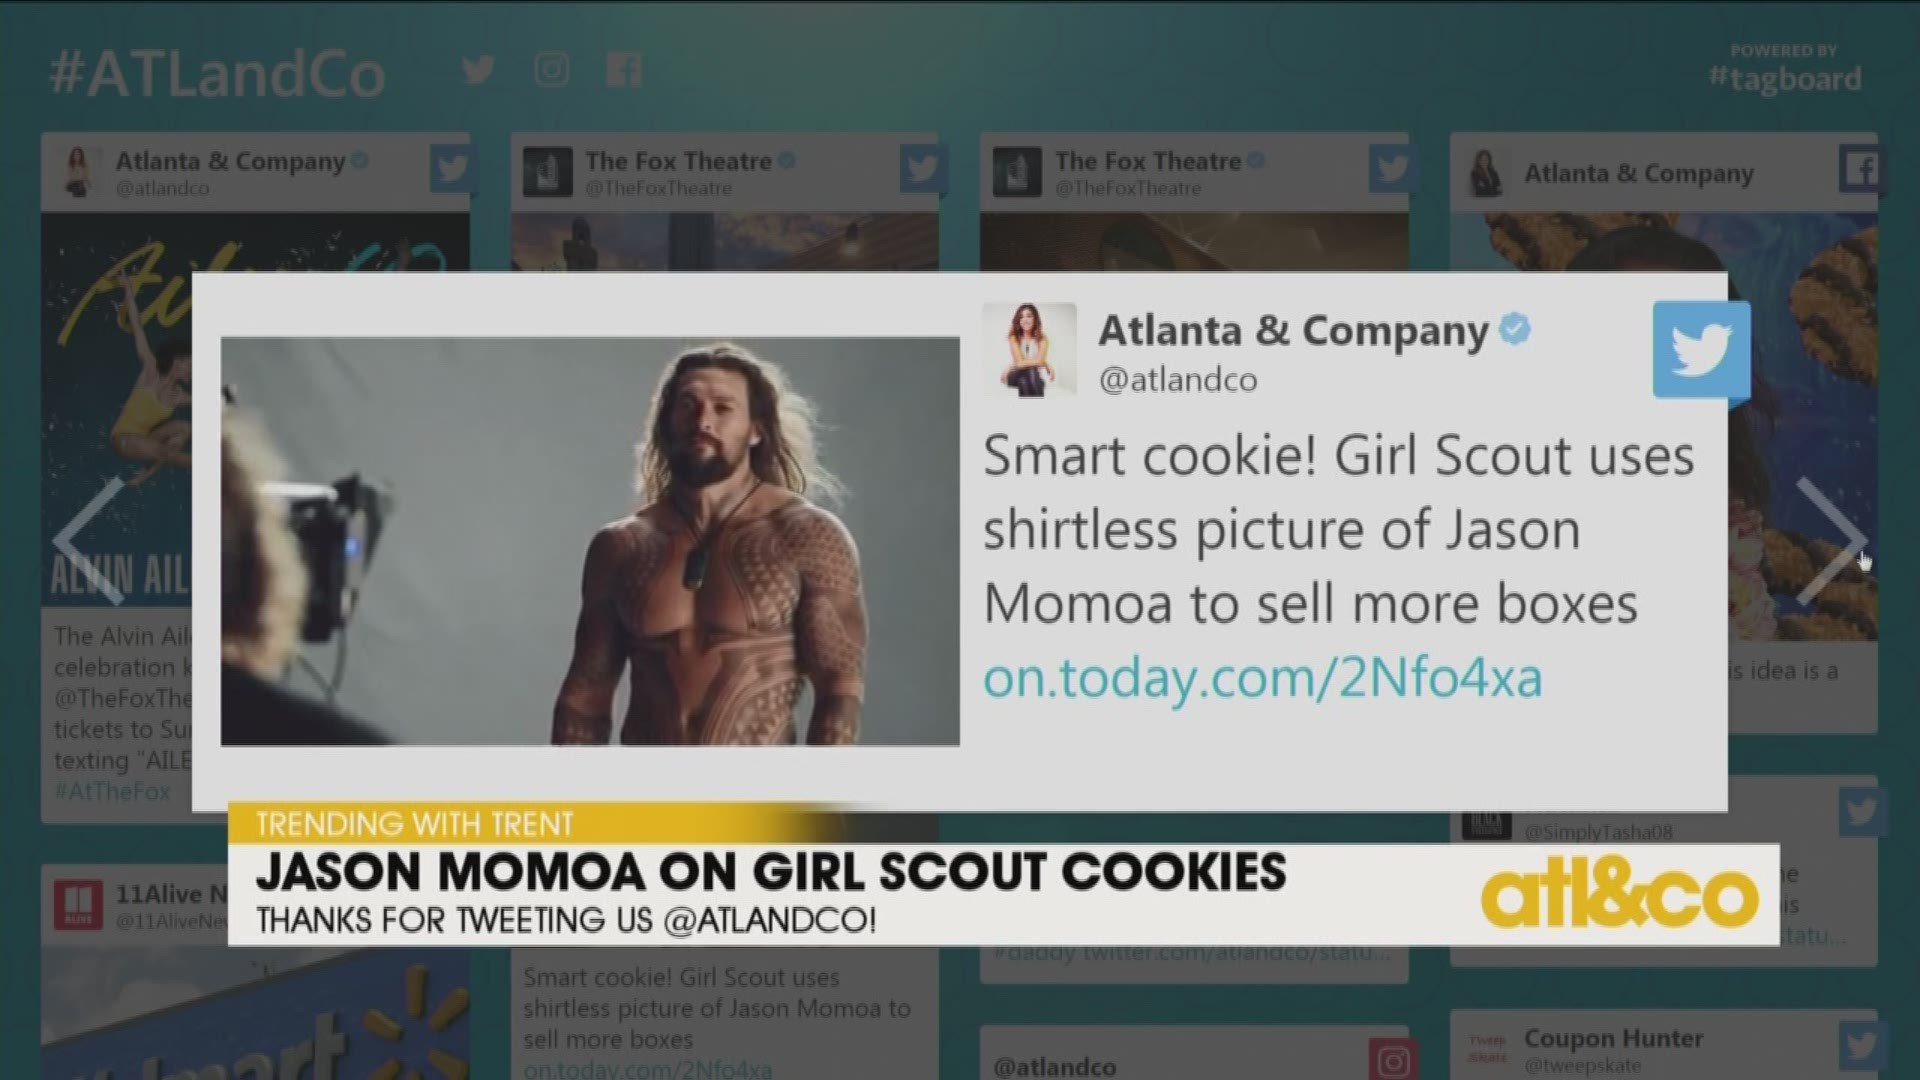 Smart cookie! Girl Scout uses shirtless picture of Jason Momoa to sell more boxes. See what else is Trending with Trent on 'Atlanta & Company'